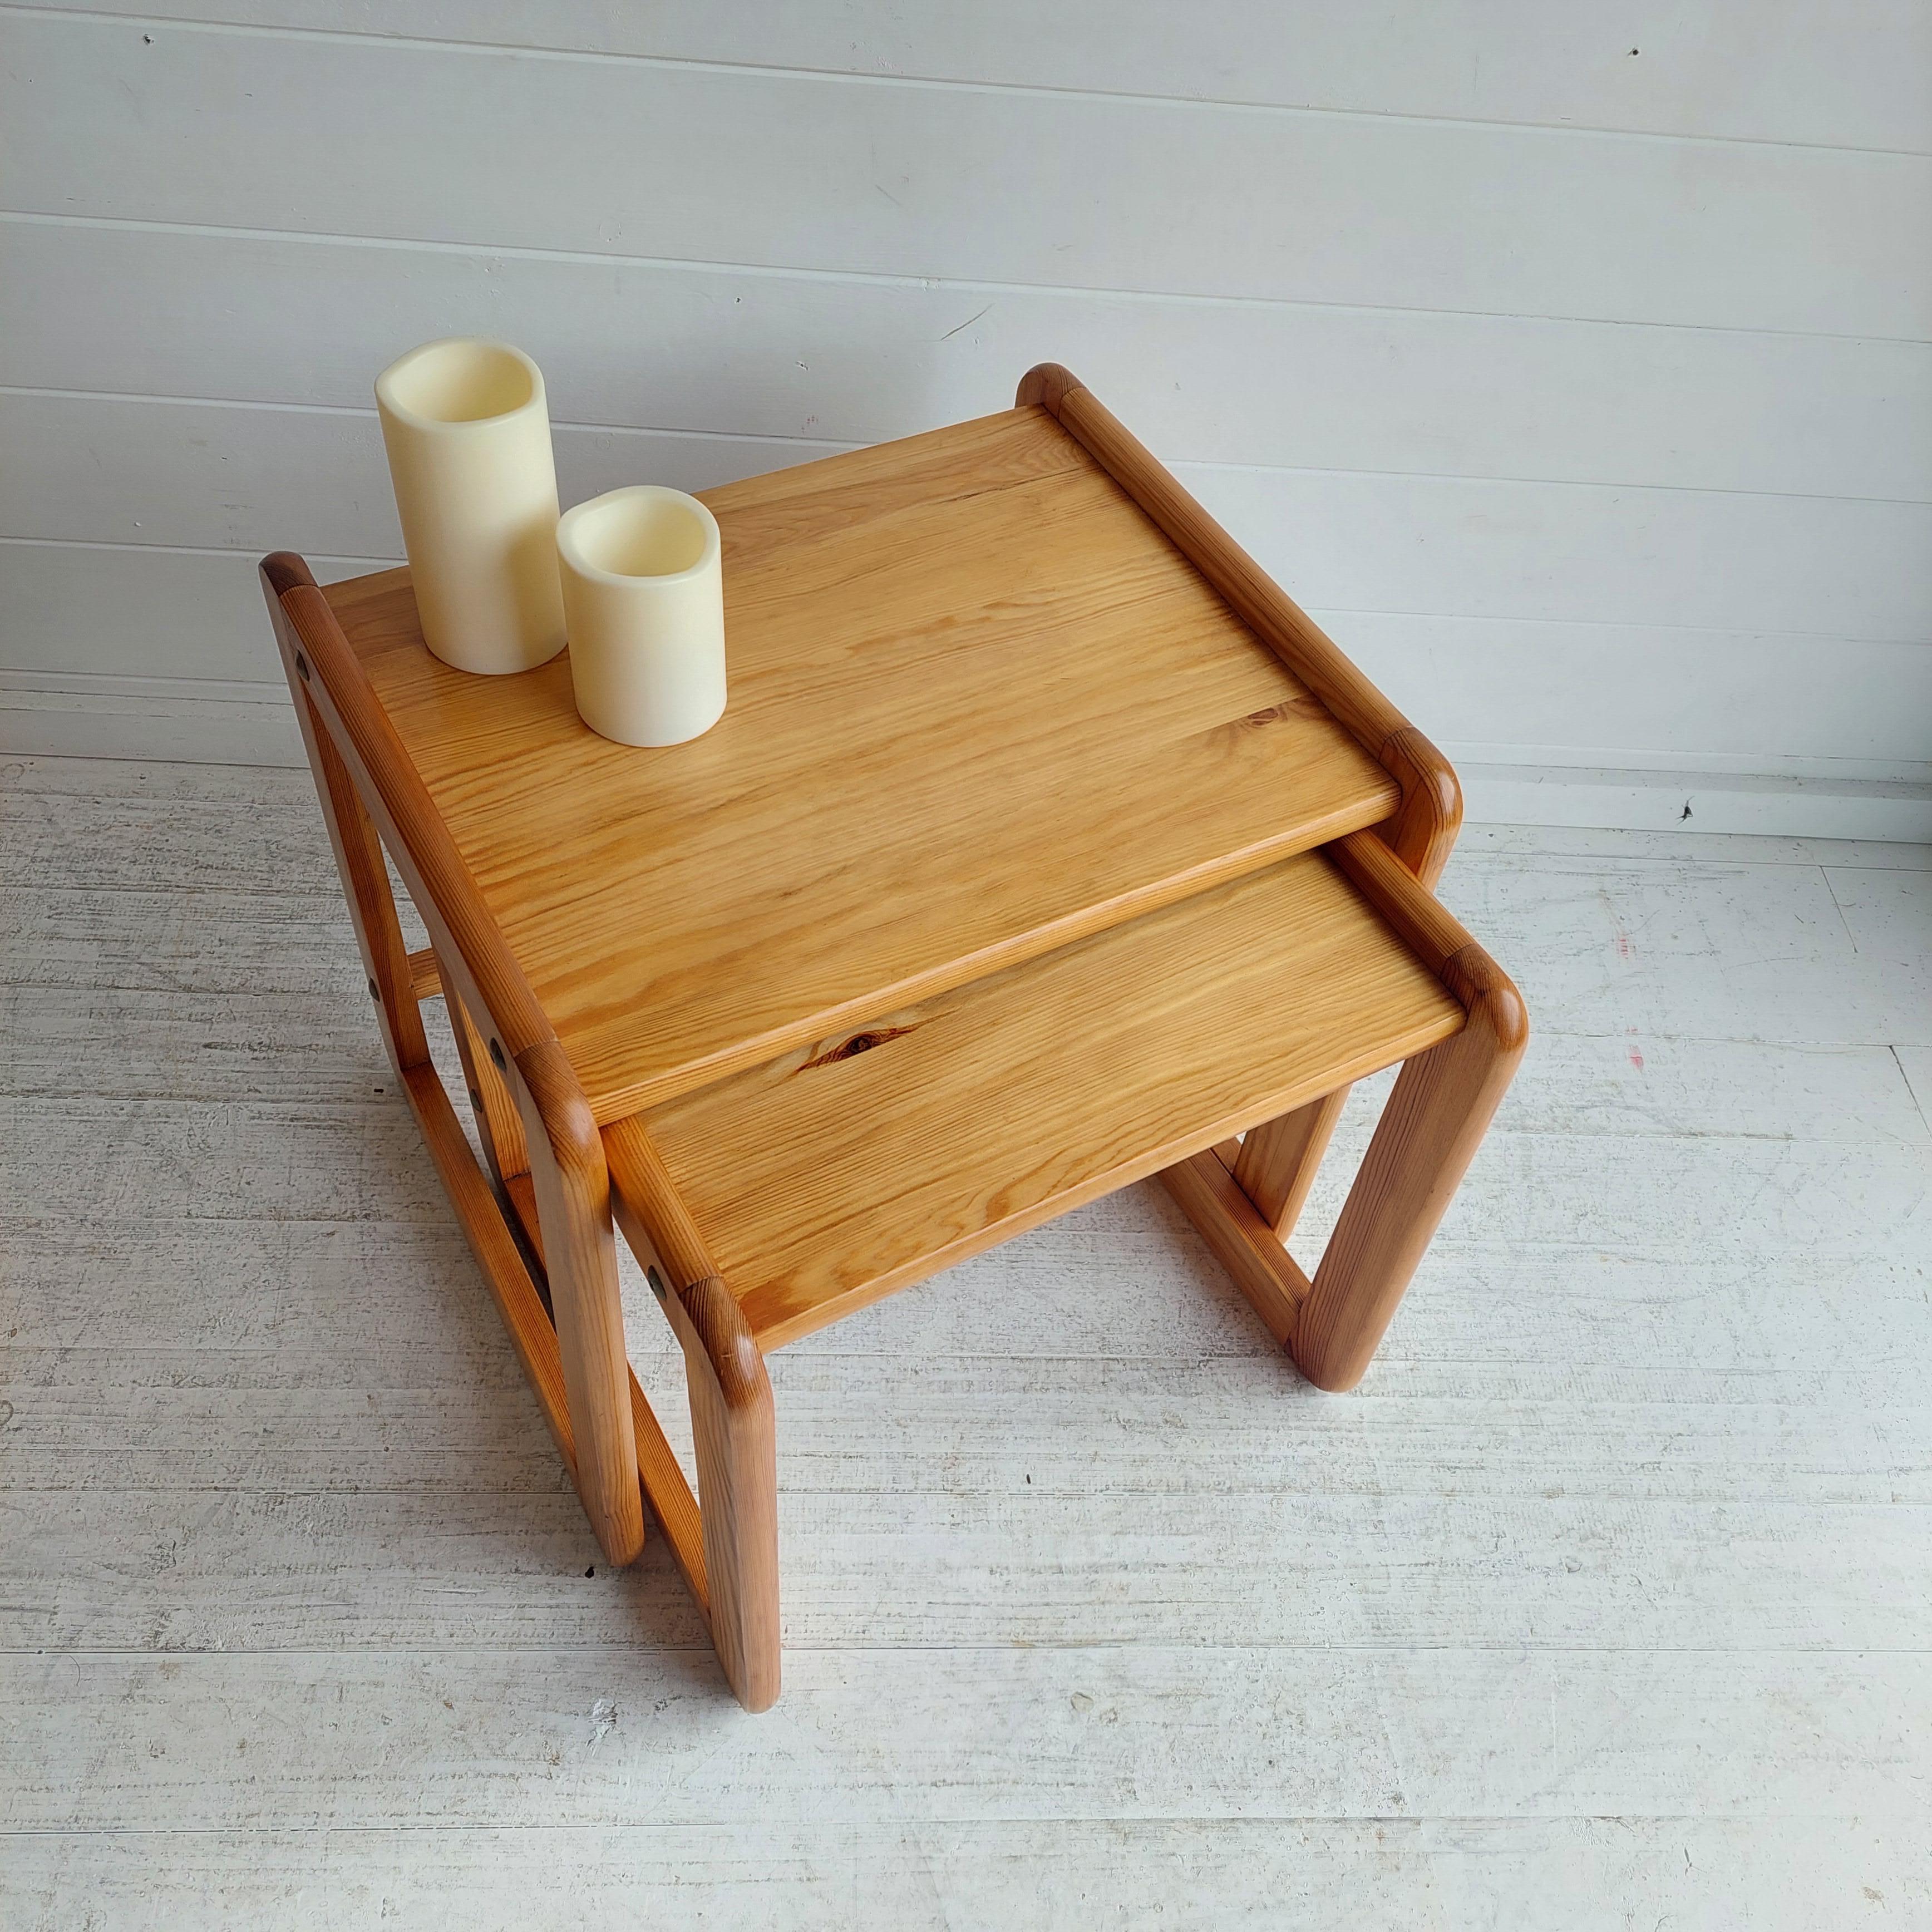 20th Century Mid Century Scandinavian Nest Of Tables In Pine From The 70s